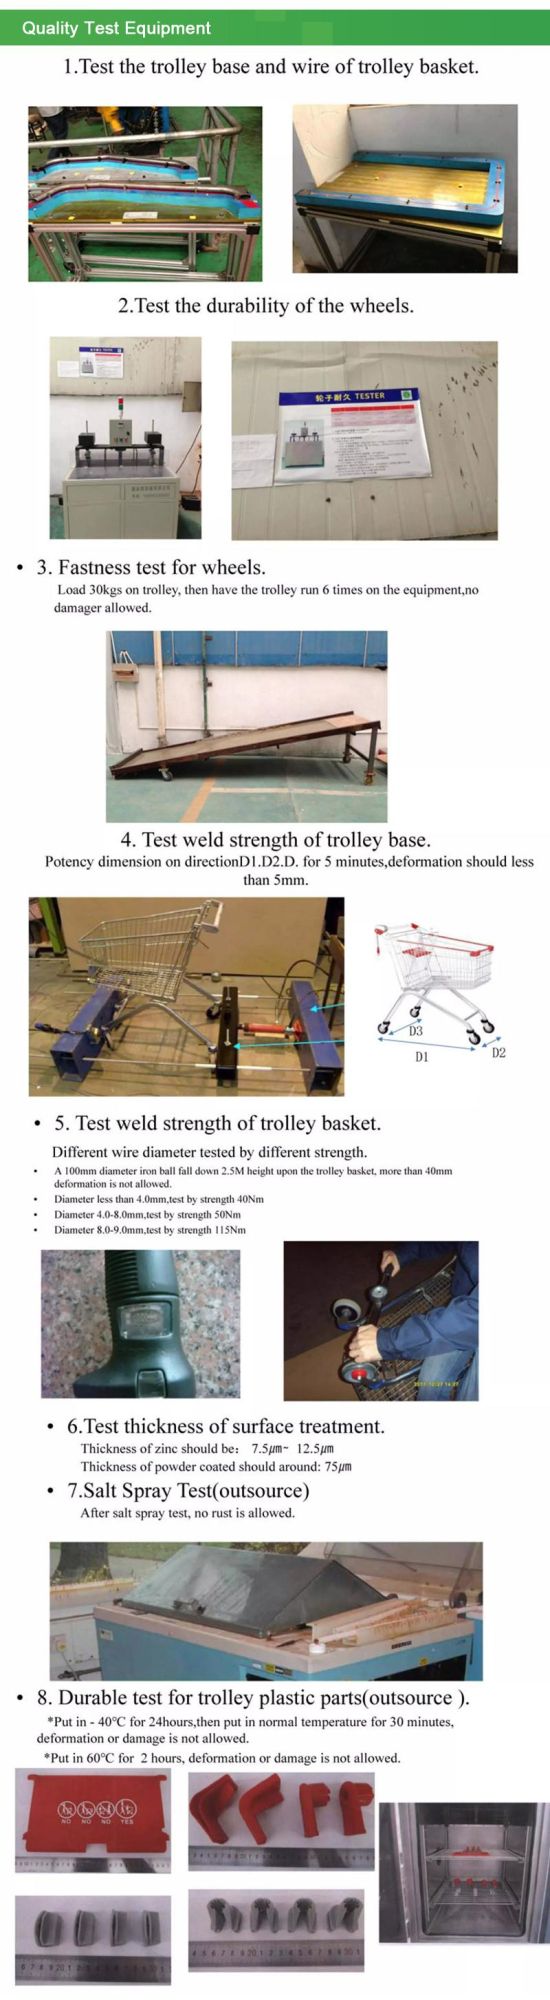 Large Capacity Zinc Plated Shopping Trolley for Vegetable Purchase